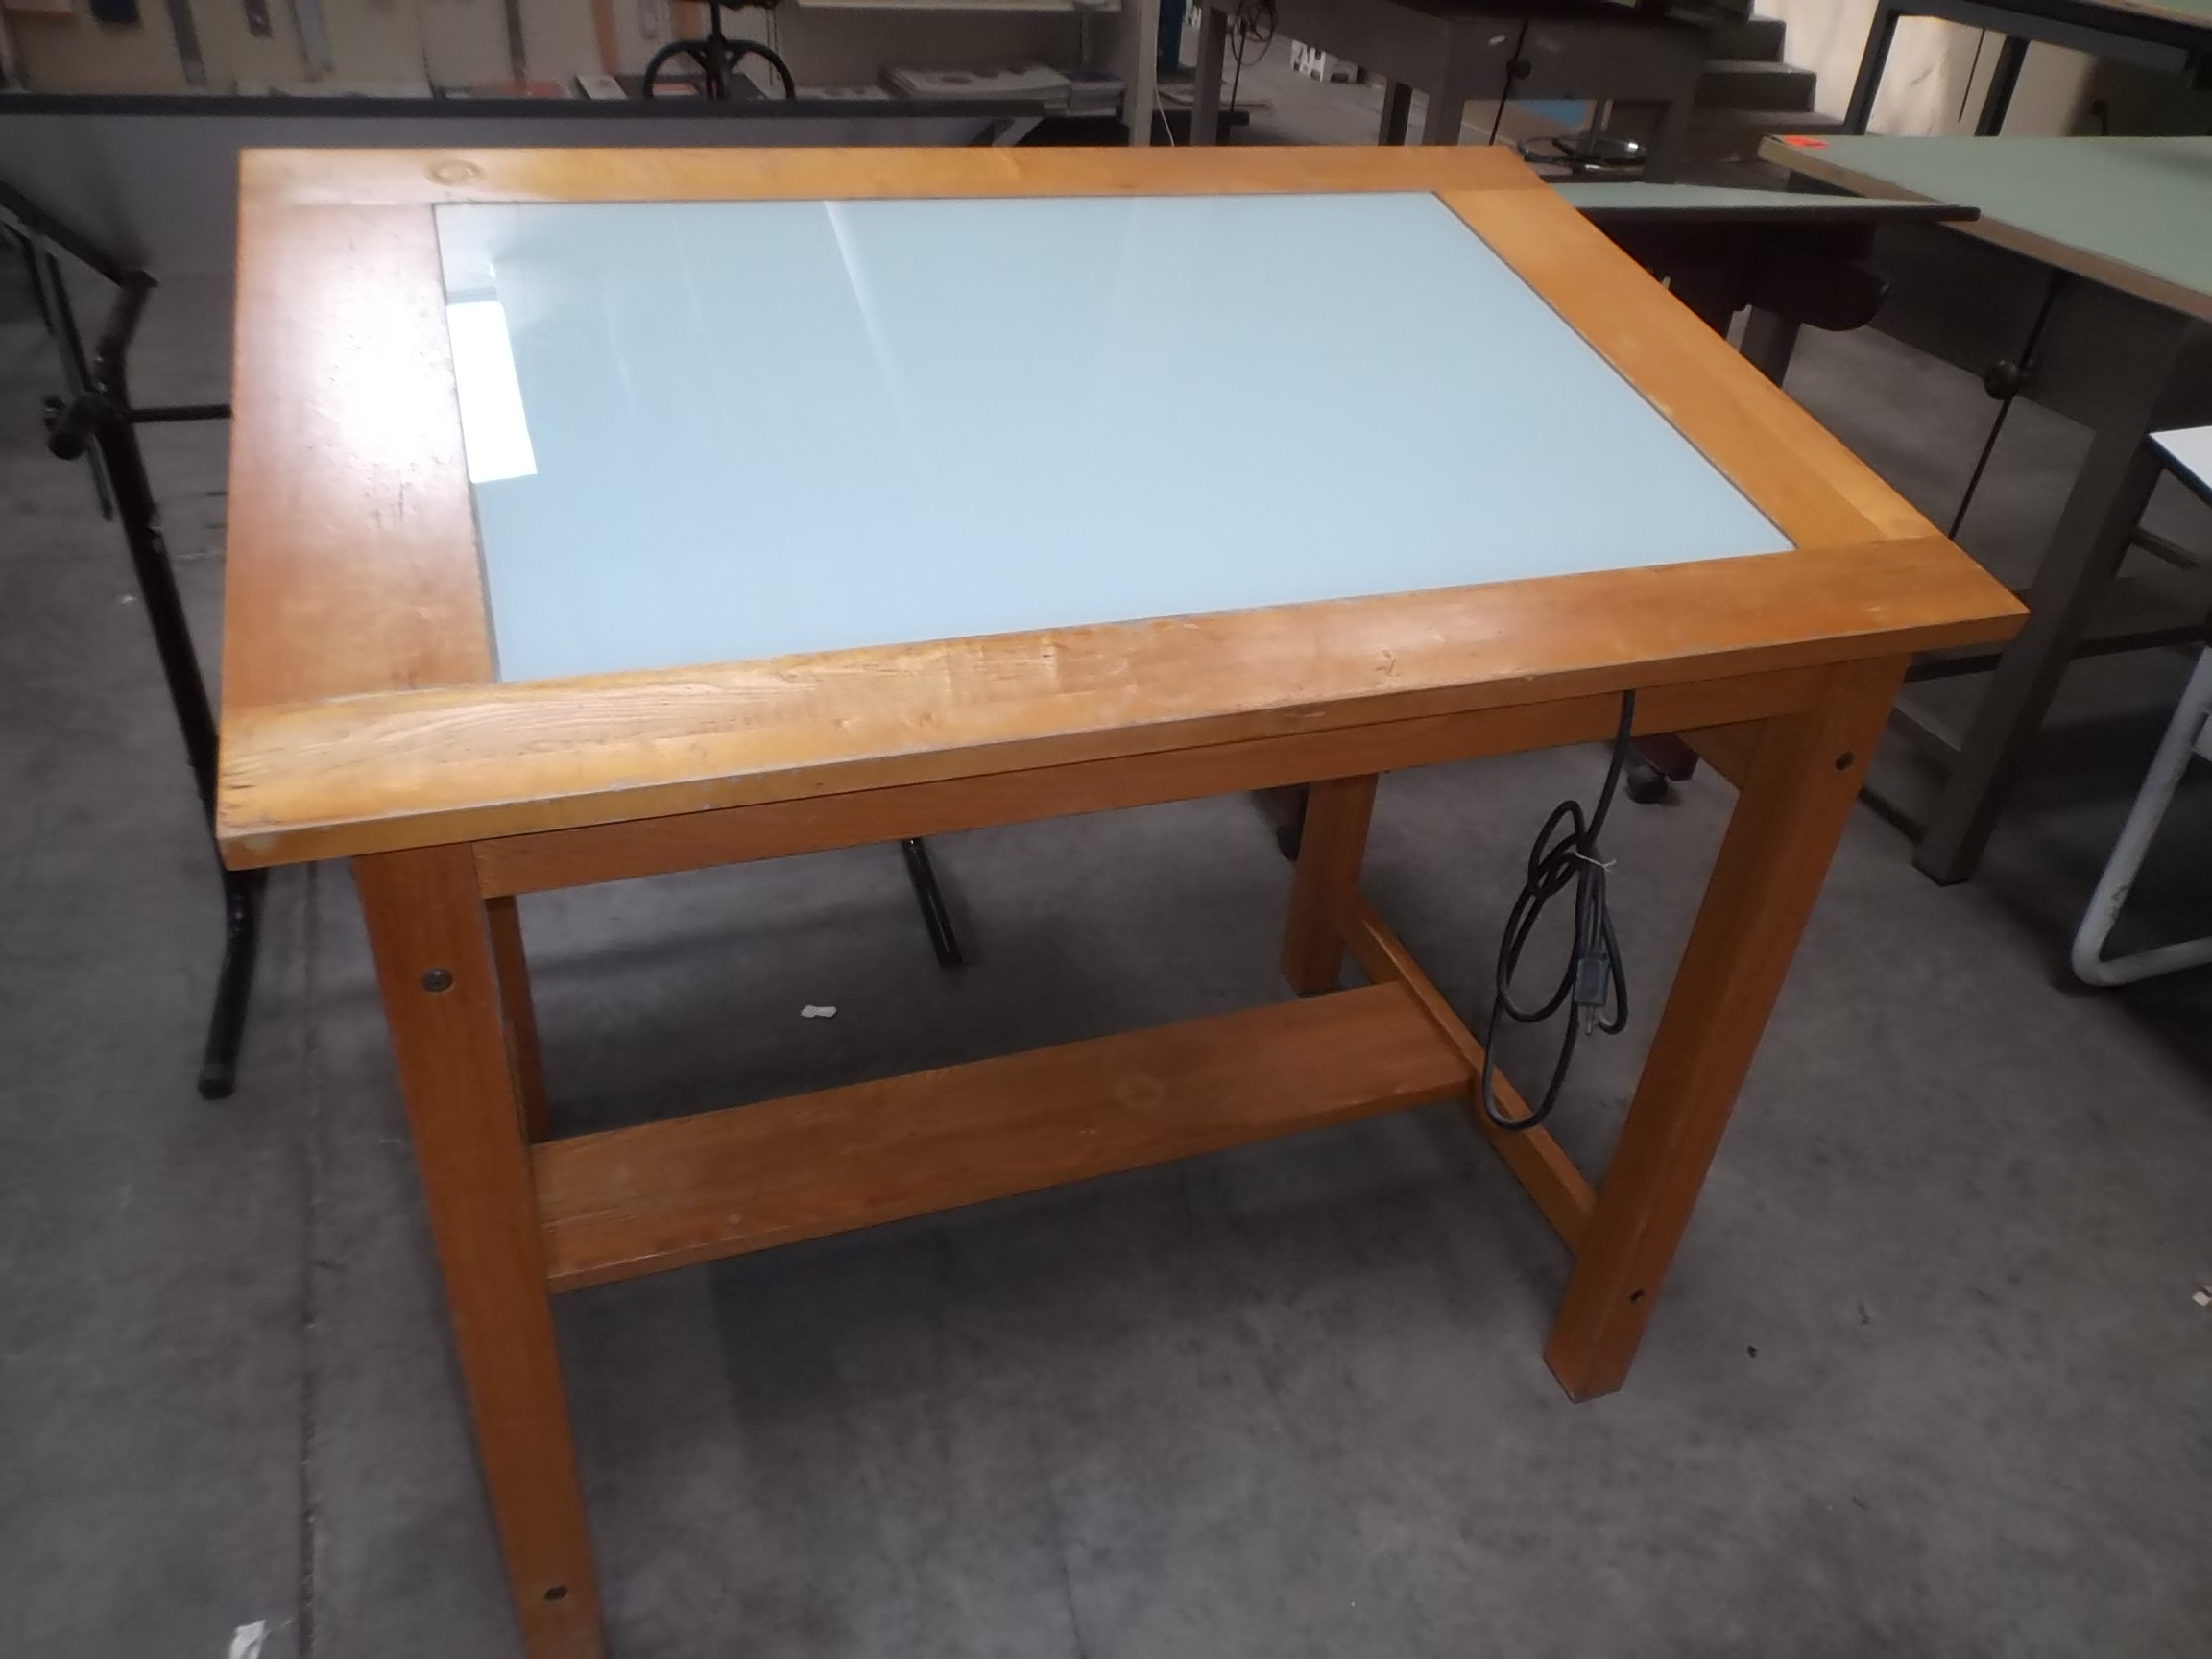 Light Tables - Light Tables for Inspections, Drawing, Drafting, Etc.